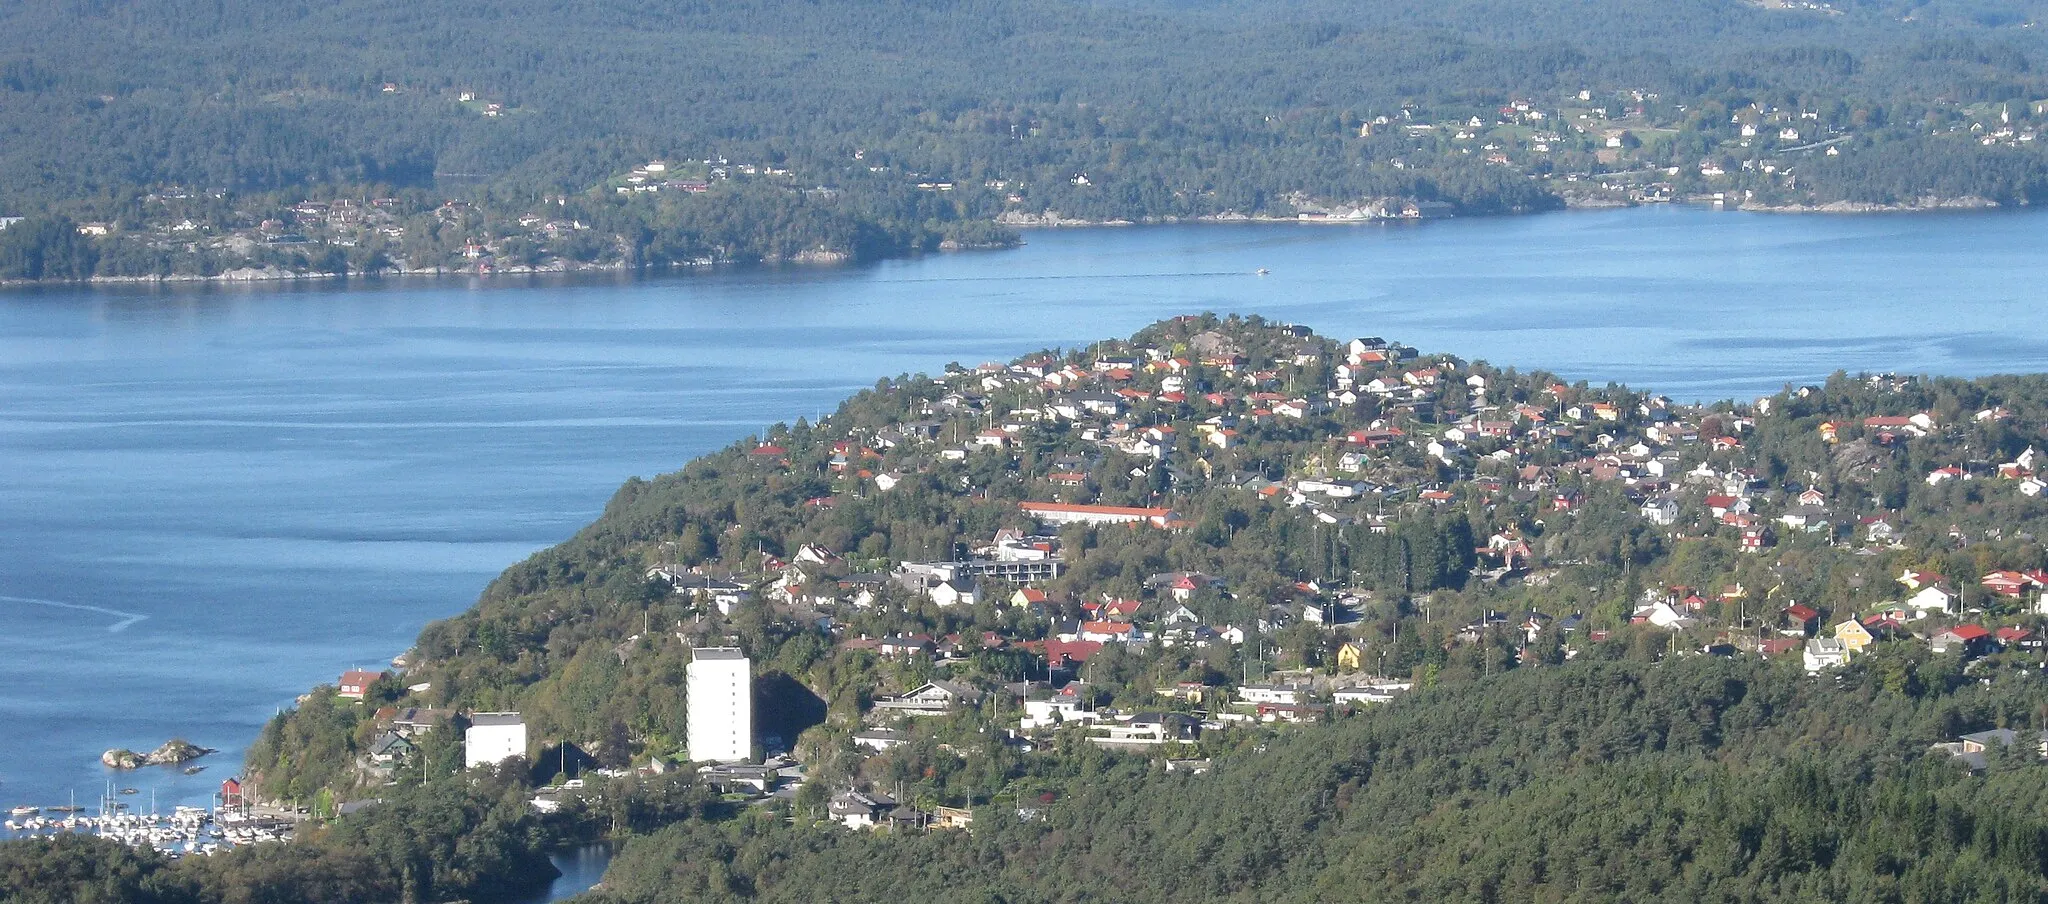 Photo showing: Tertnes, Bergen, Norway. In the background is the fjord Byfjorden, and at the top of the picture, the island Askøy.